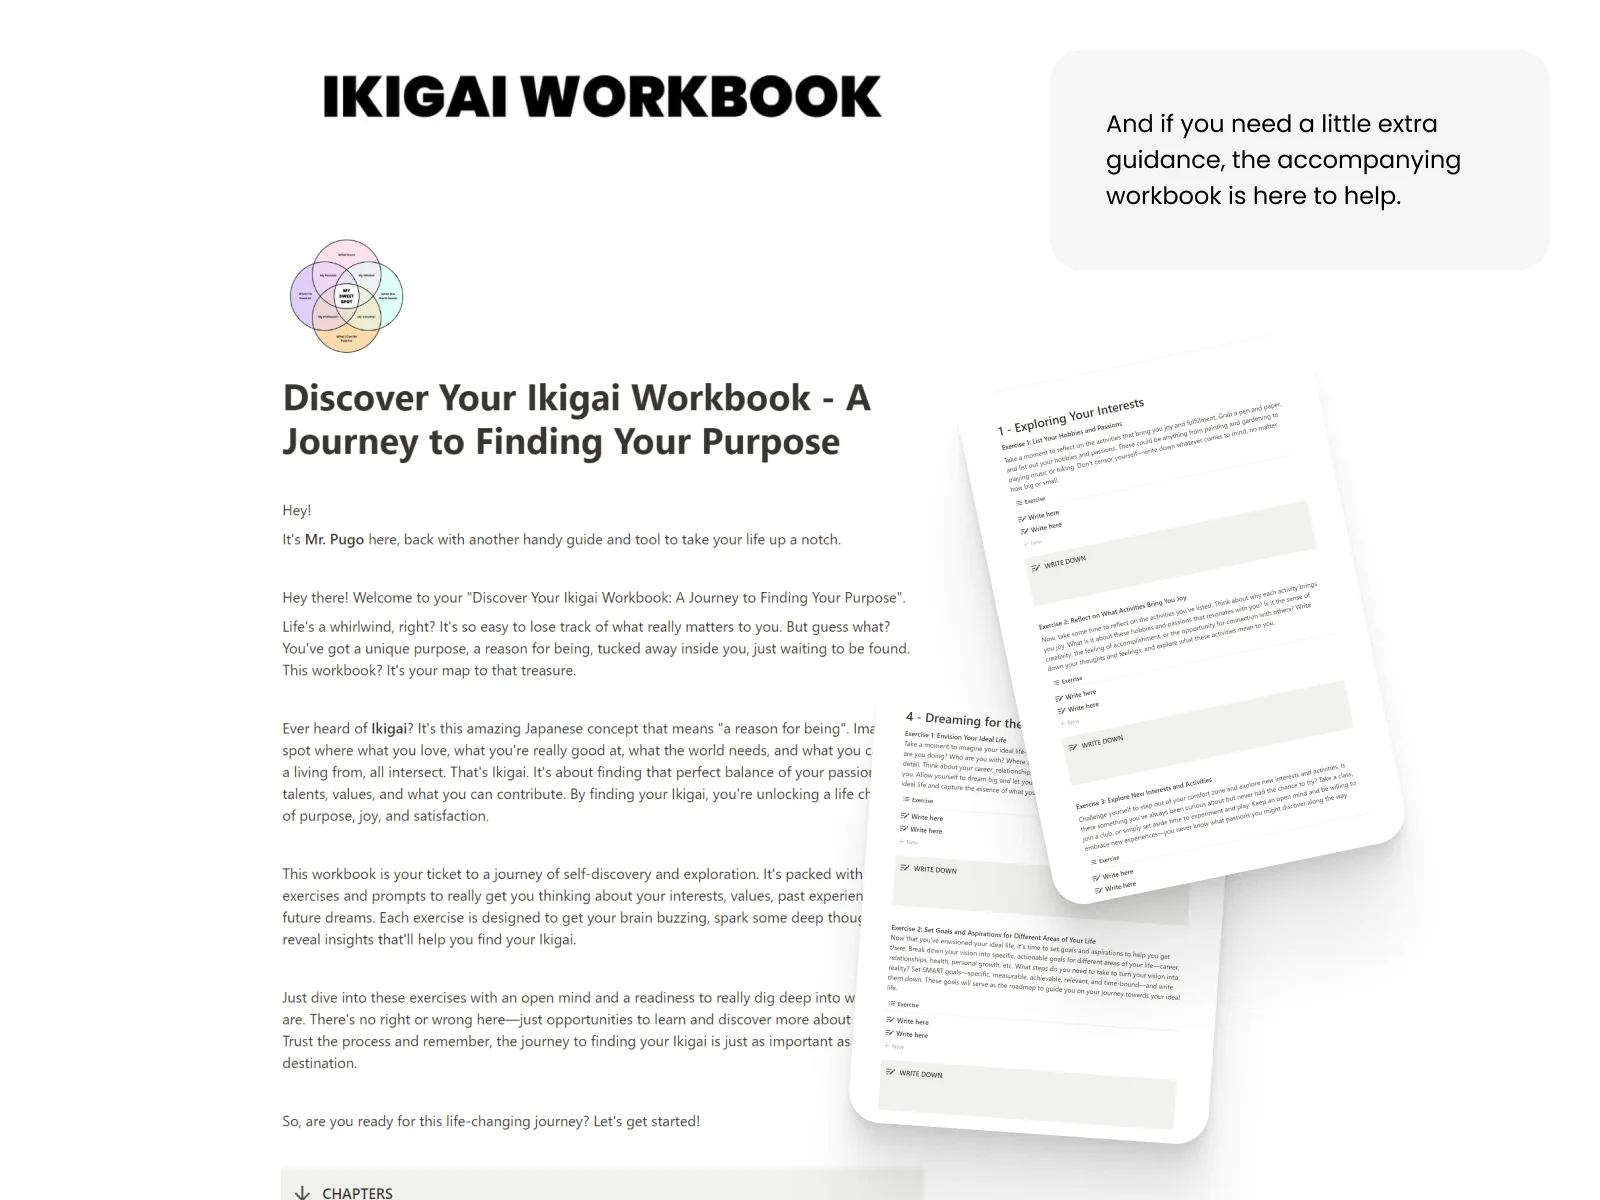 Guided Discovery: Utilizing Our Workbook for Your IKIGAI Journey